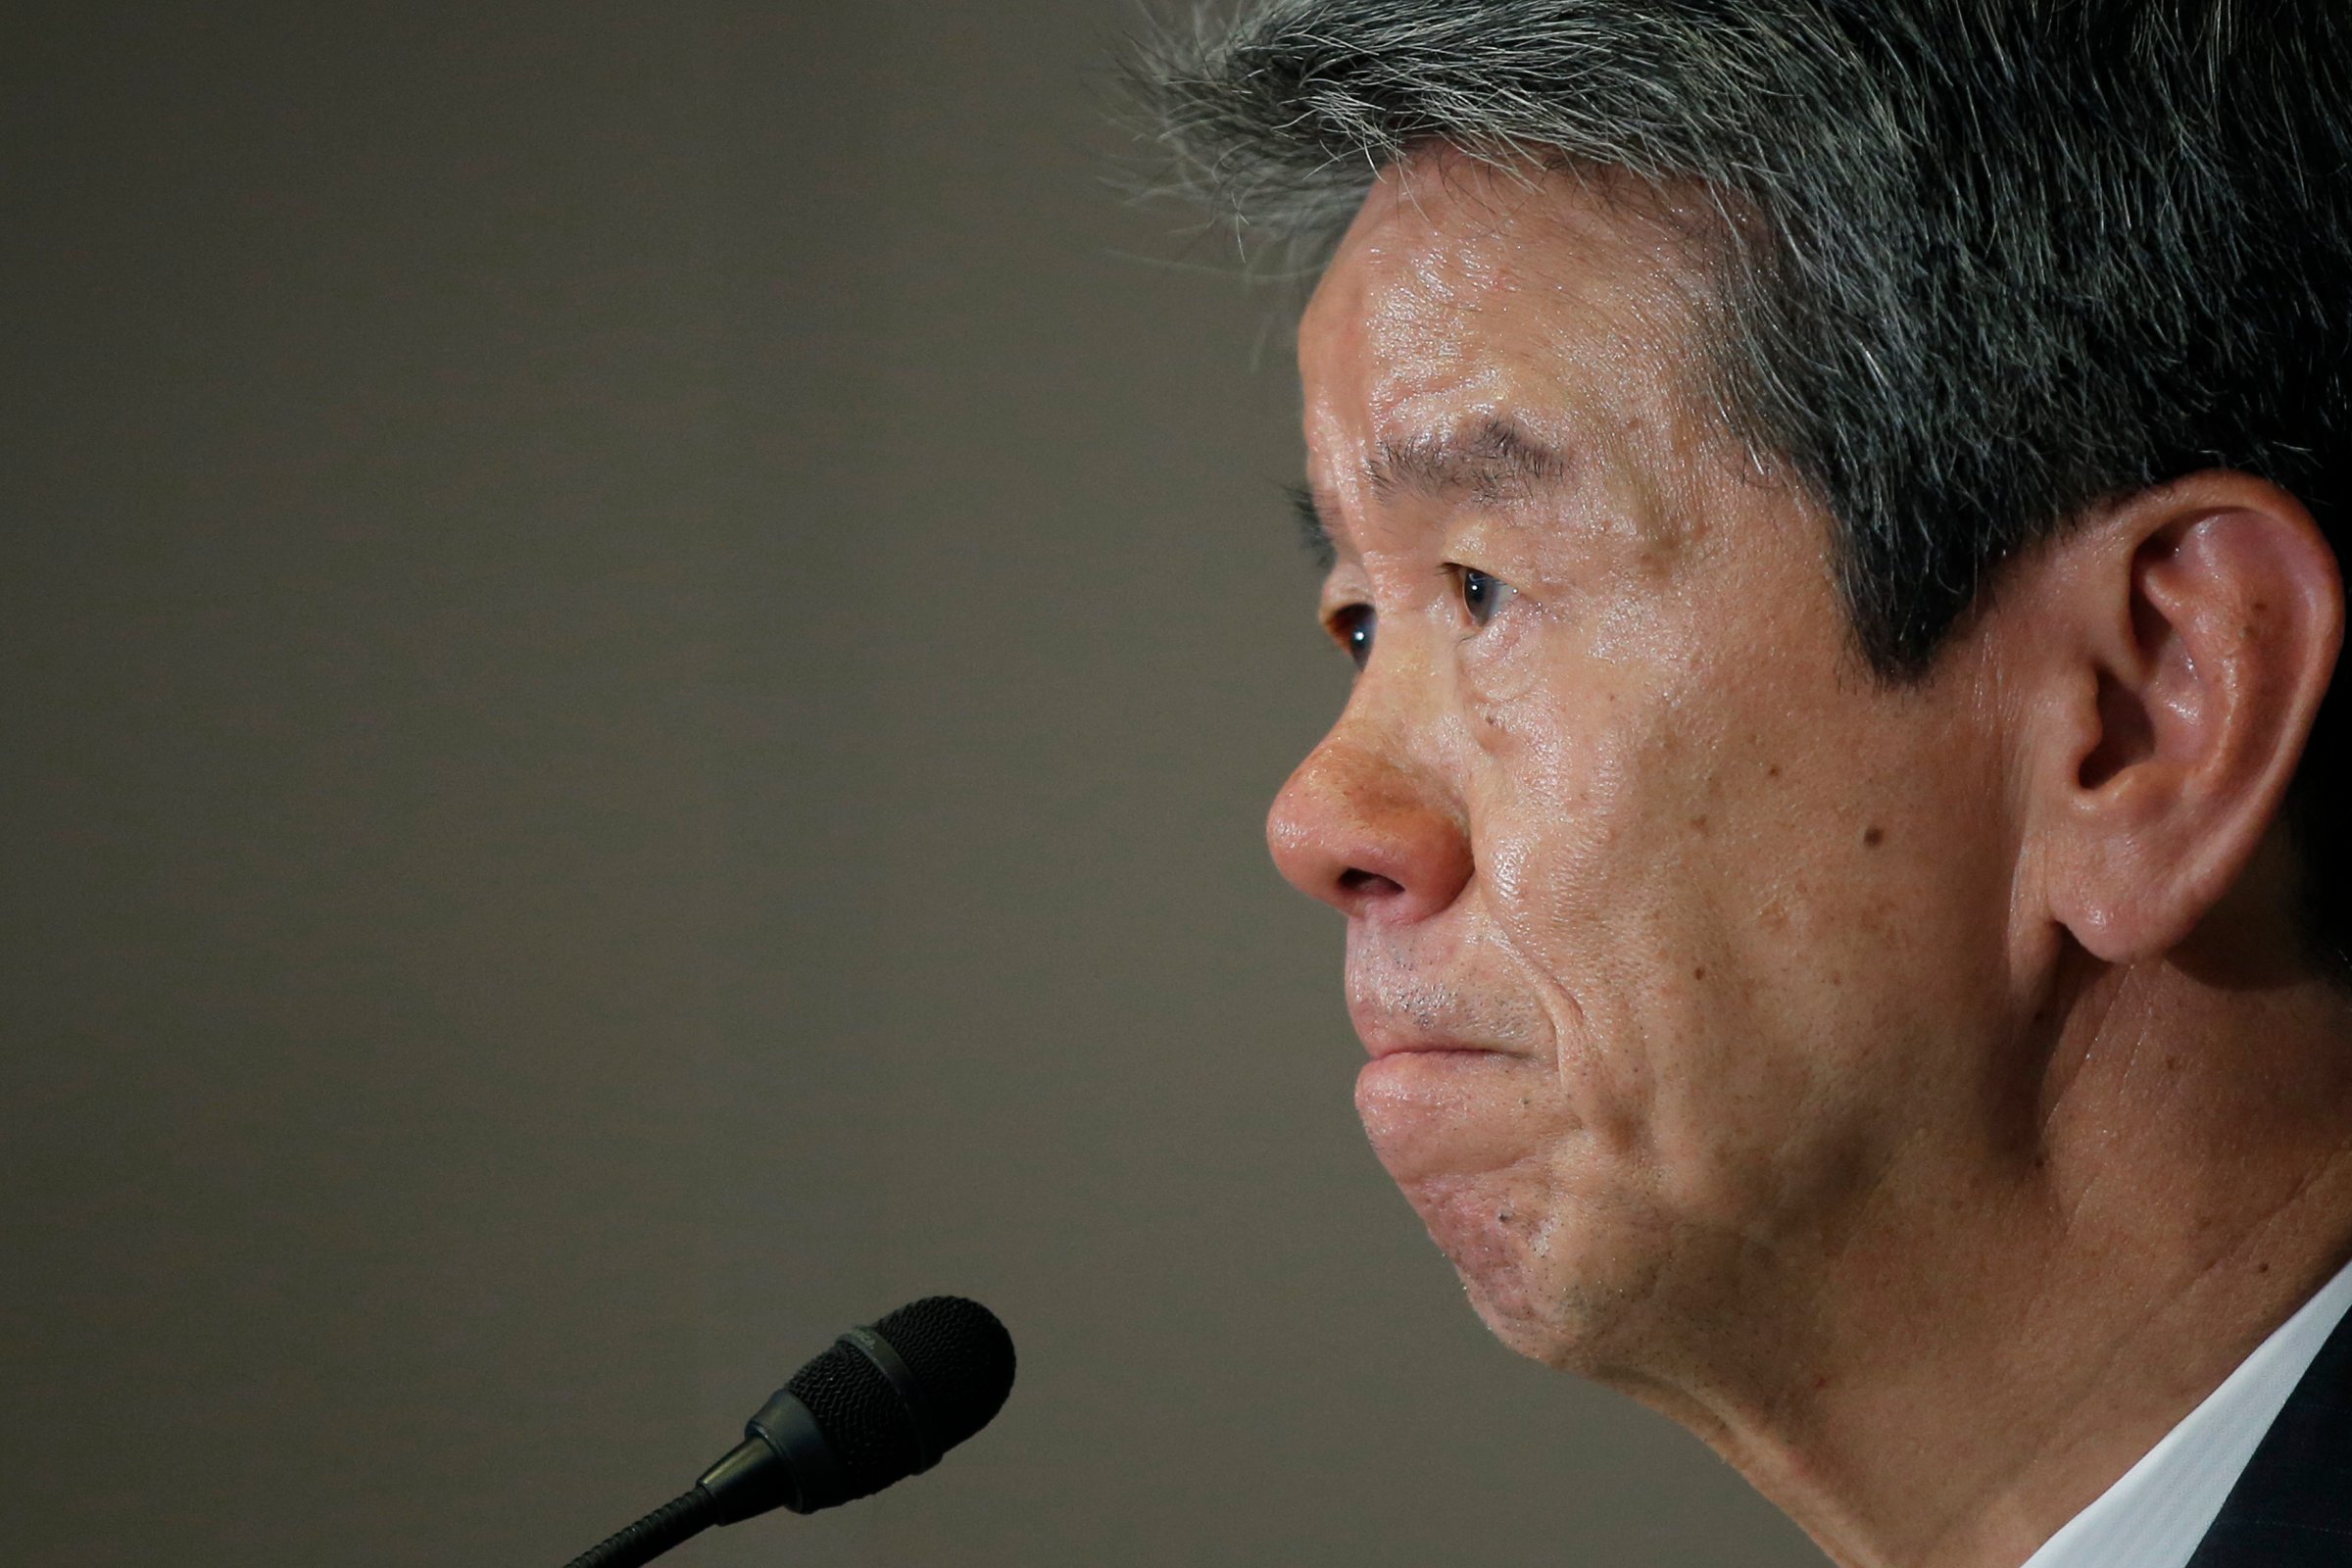 Hisao Tanaka, president and chief executive officer of Toshiba Corp., pauses during a news conference at the company's headquarters in Tokyo, Japan, on Friday, May 15, 2015. Toshiba Corp. named two lawyers and two certified public accountants to a third-party committee that is expanding an investigation started by an internal probe last month over accounting practices. Photographer: Kiyoshi Ota/Bloomberg *** Local Caption *** Hisao Tanaka